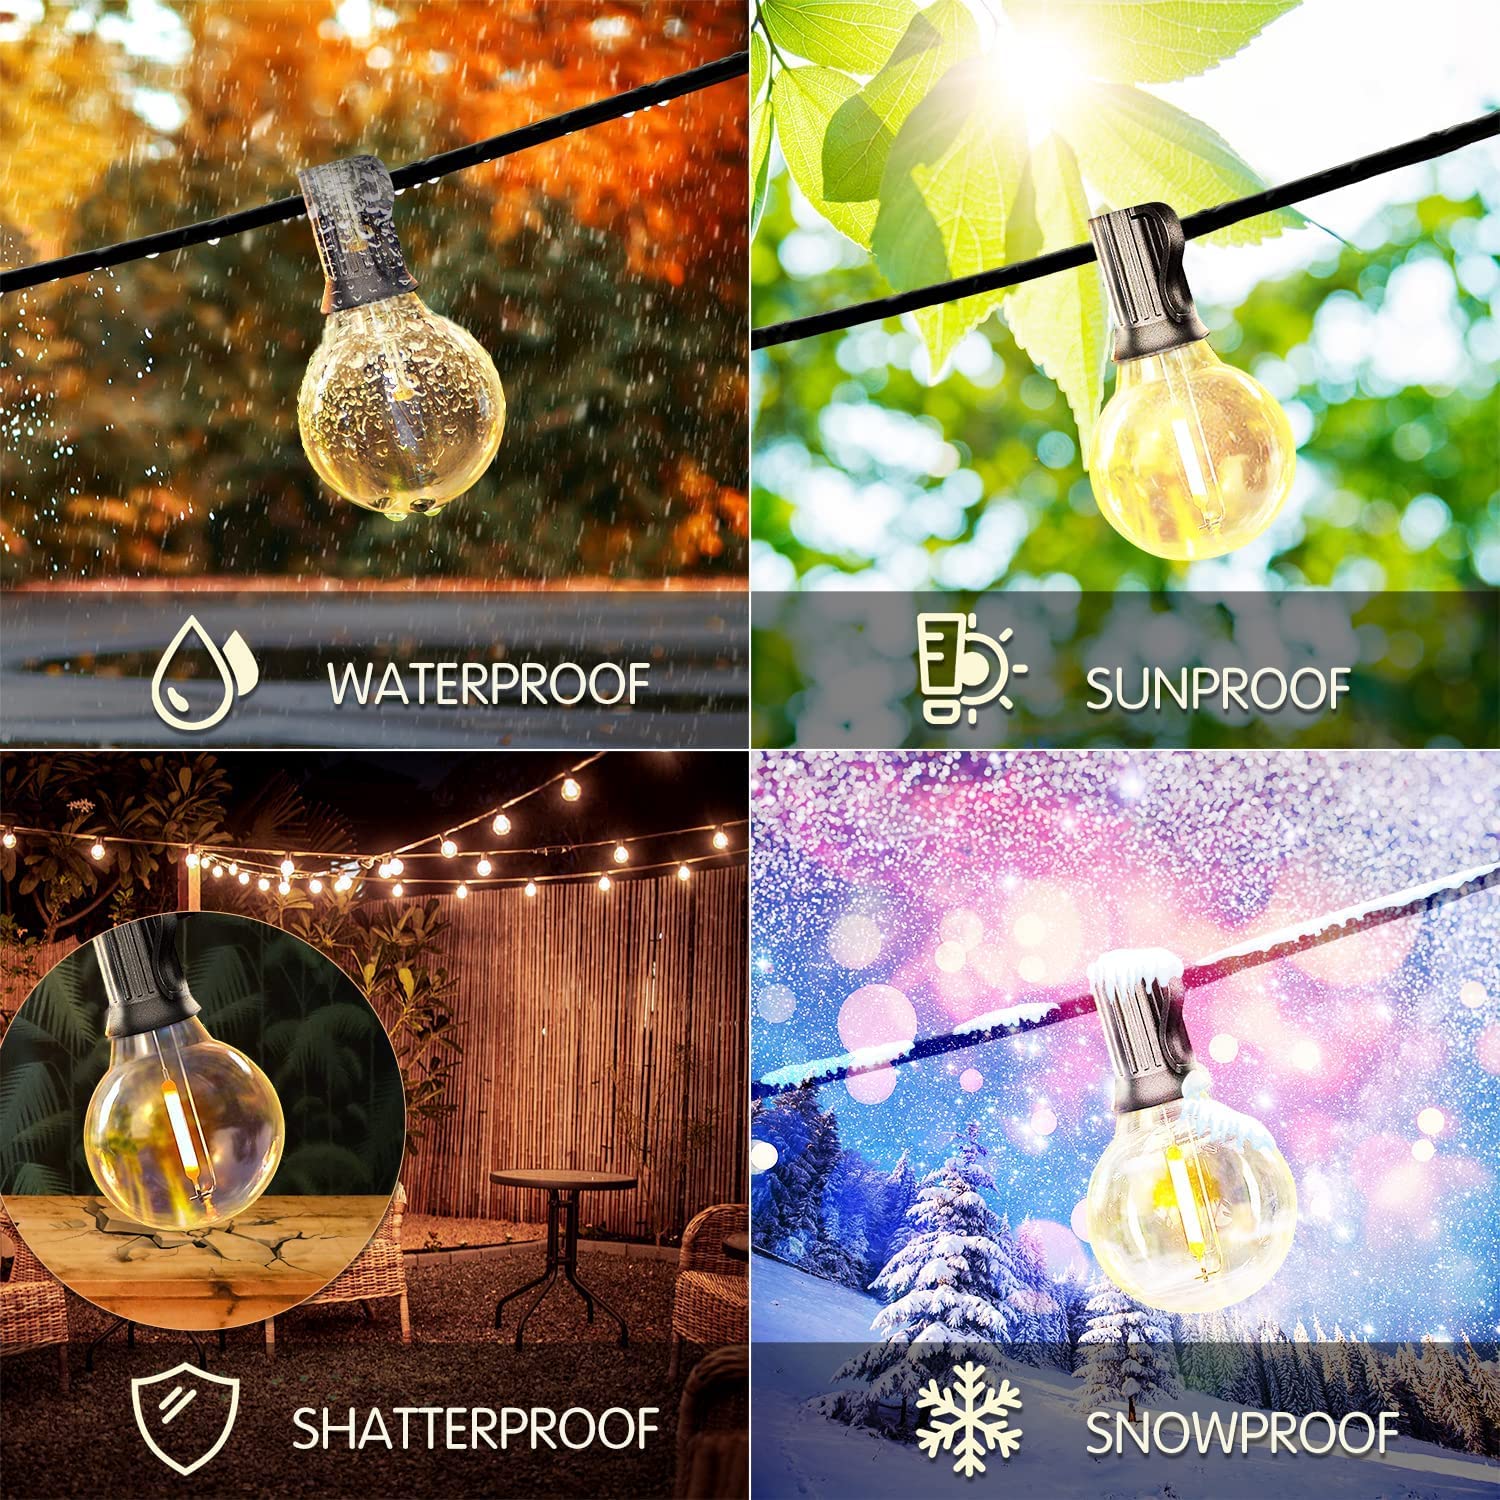 DAYBETTER 25ft Outdoor String Lights,15W G40 E12 Globe Patio Lights with 12  Edison Vintage Bulbs,Waterproof Connectable Hanging Lights for Backyard ,Porch,Balcony,Party Decor